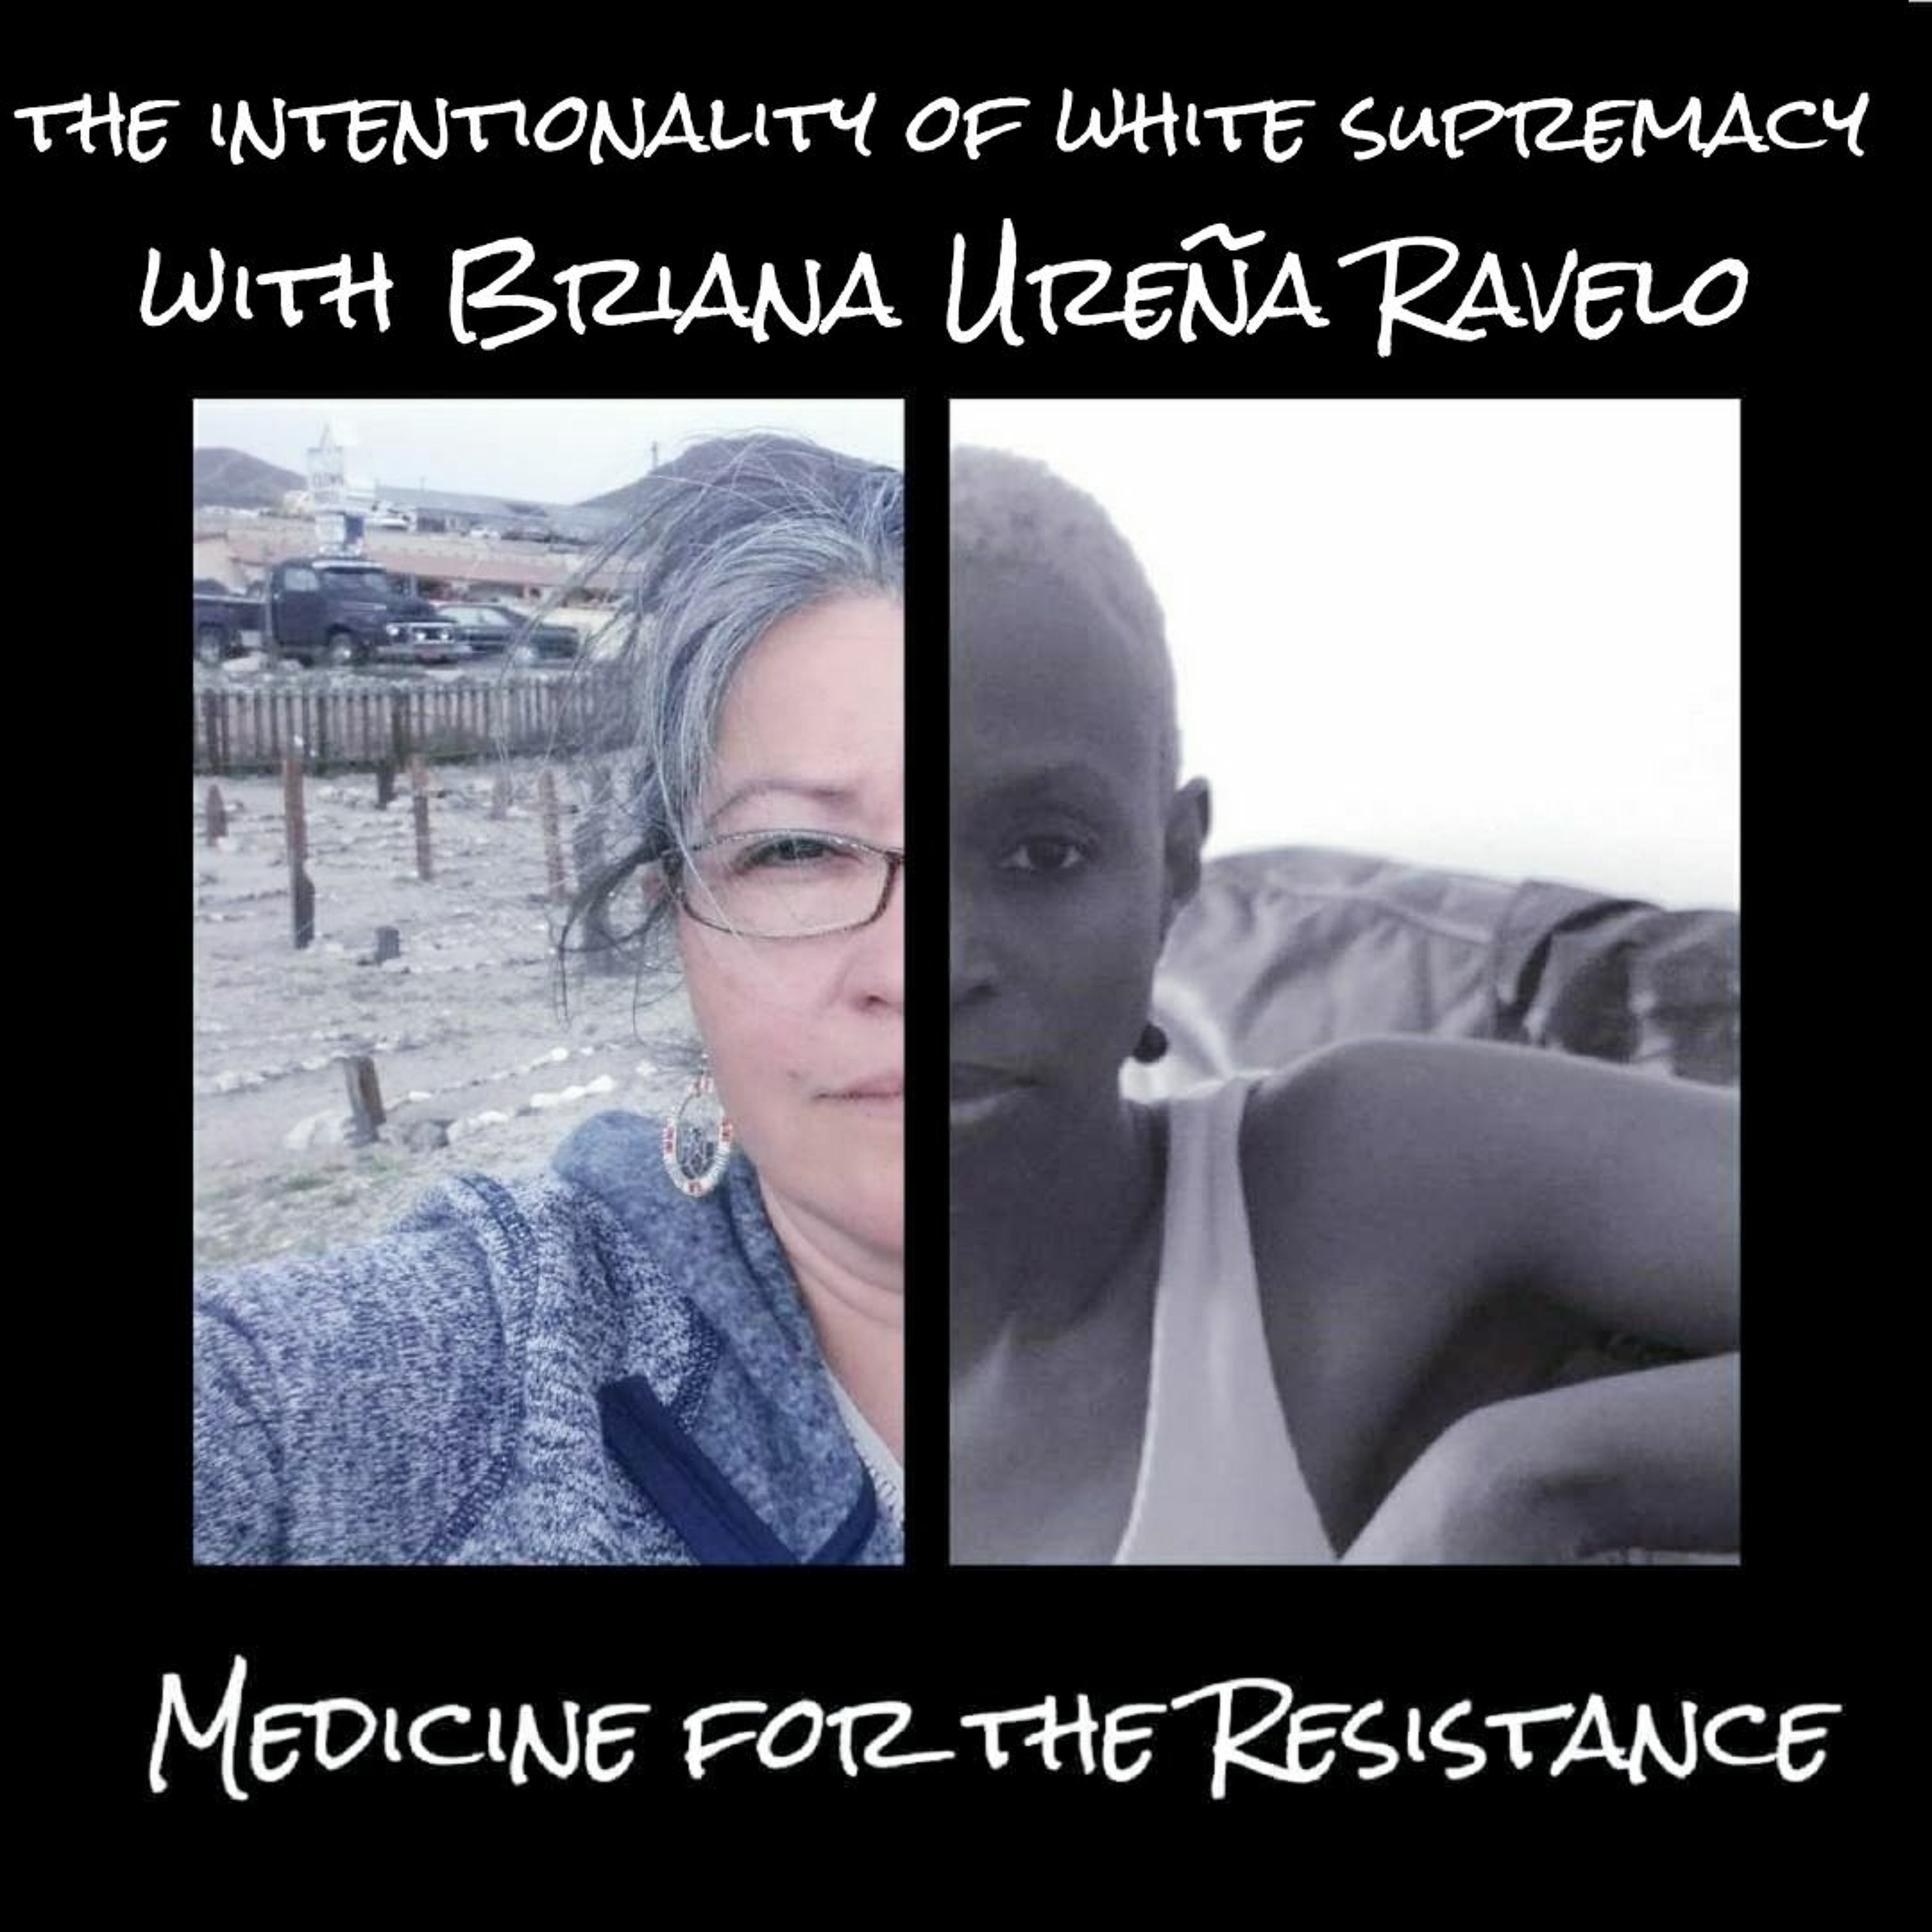 The intentionality of white supremacy with Briana Ureña Ravelo